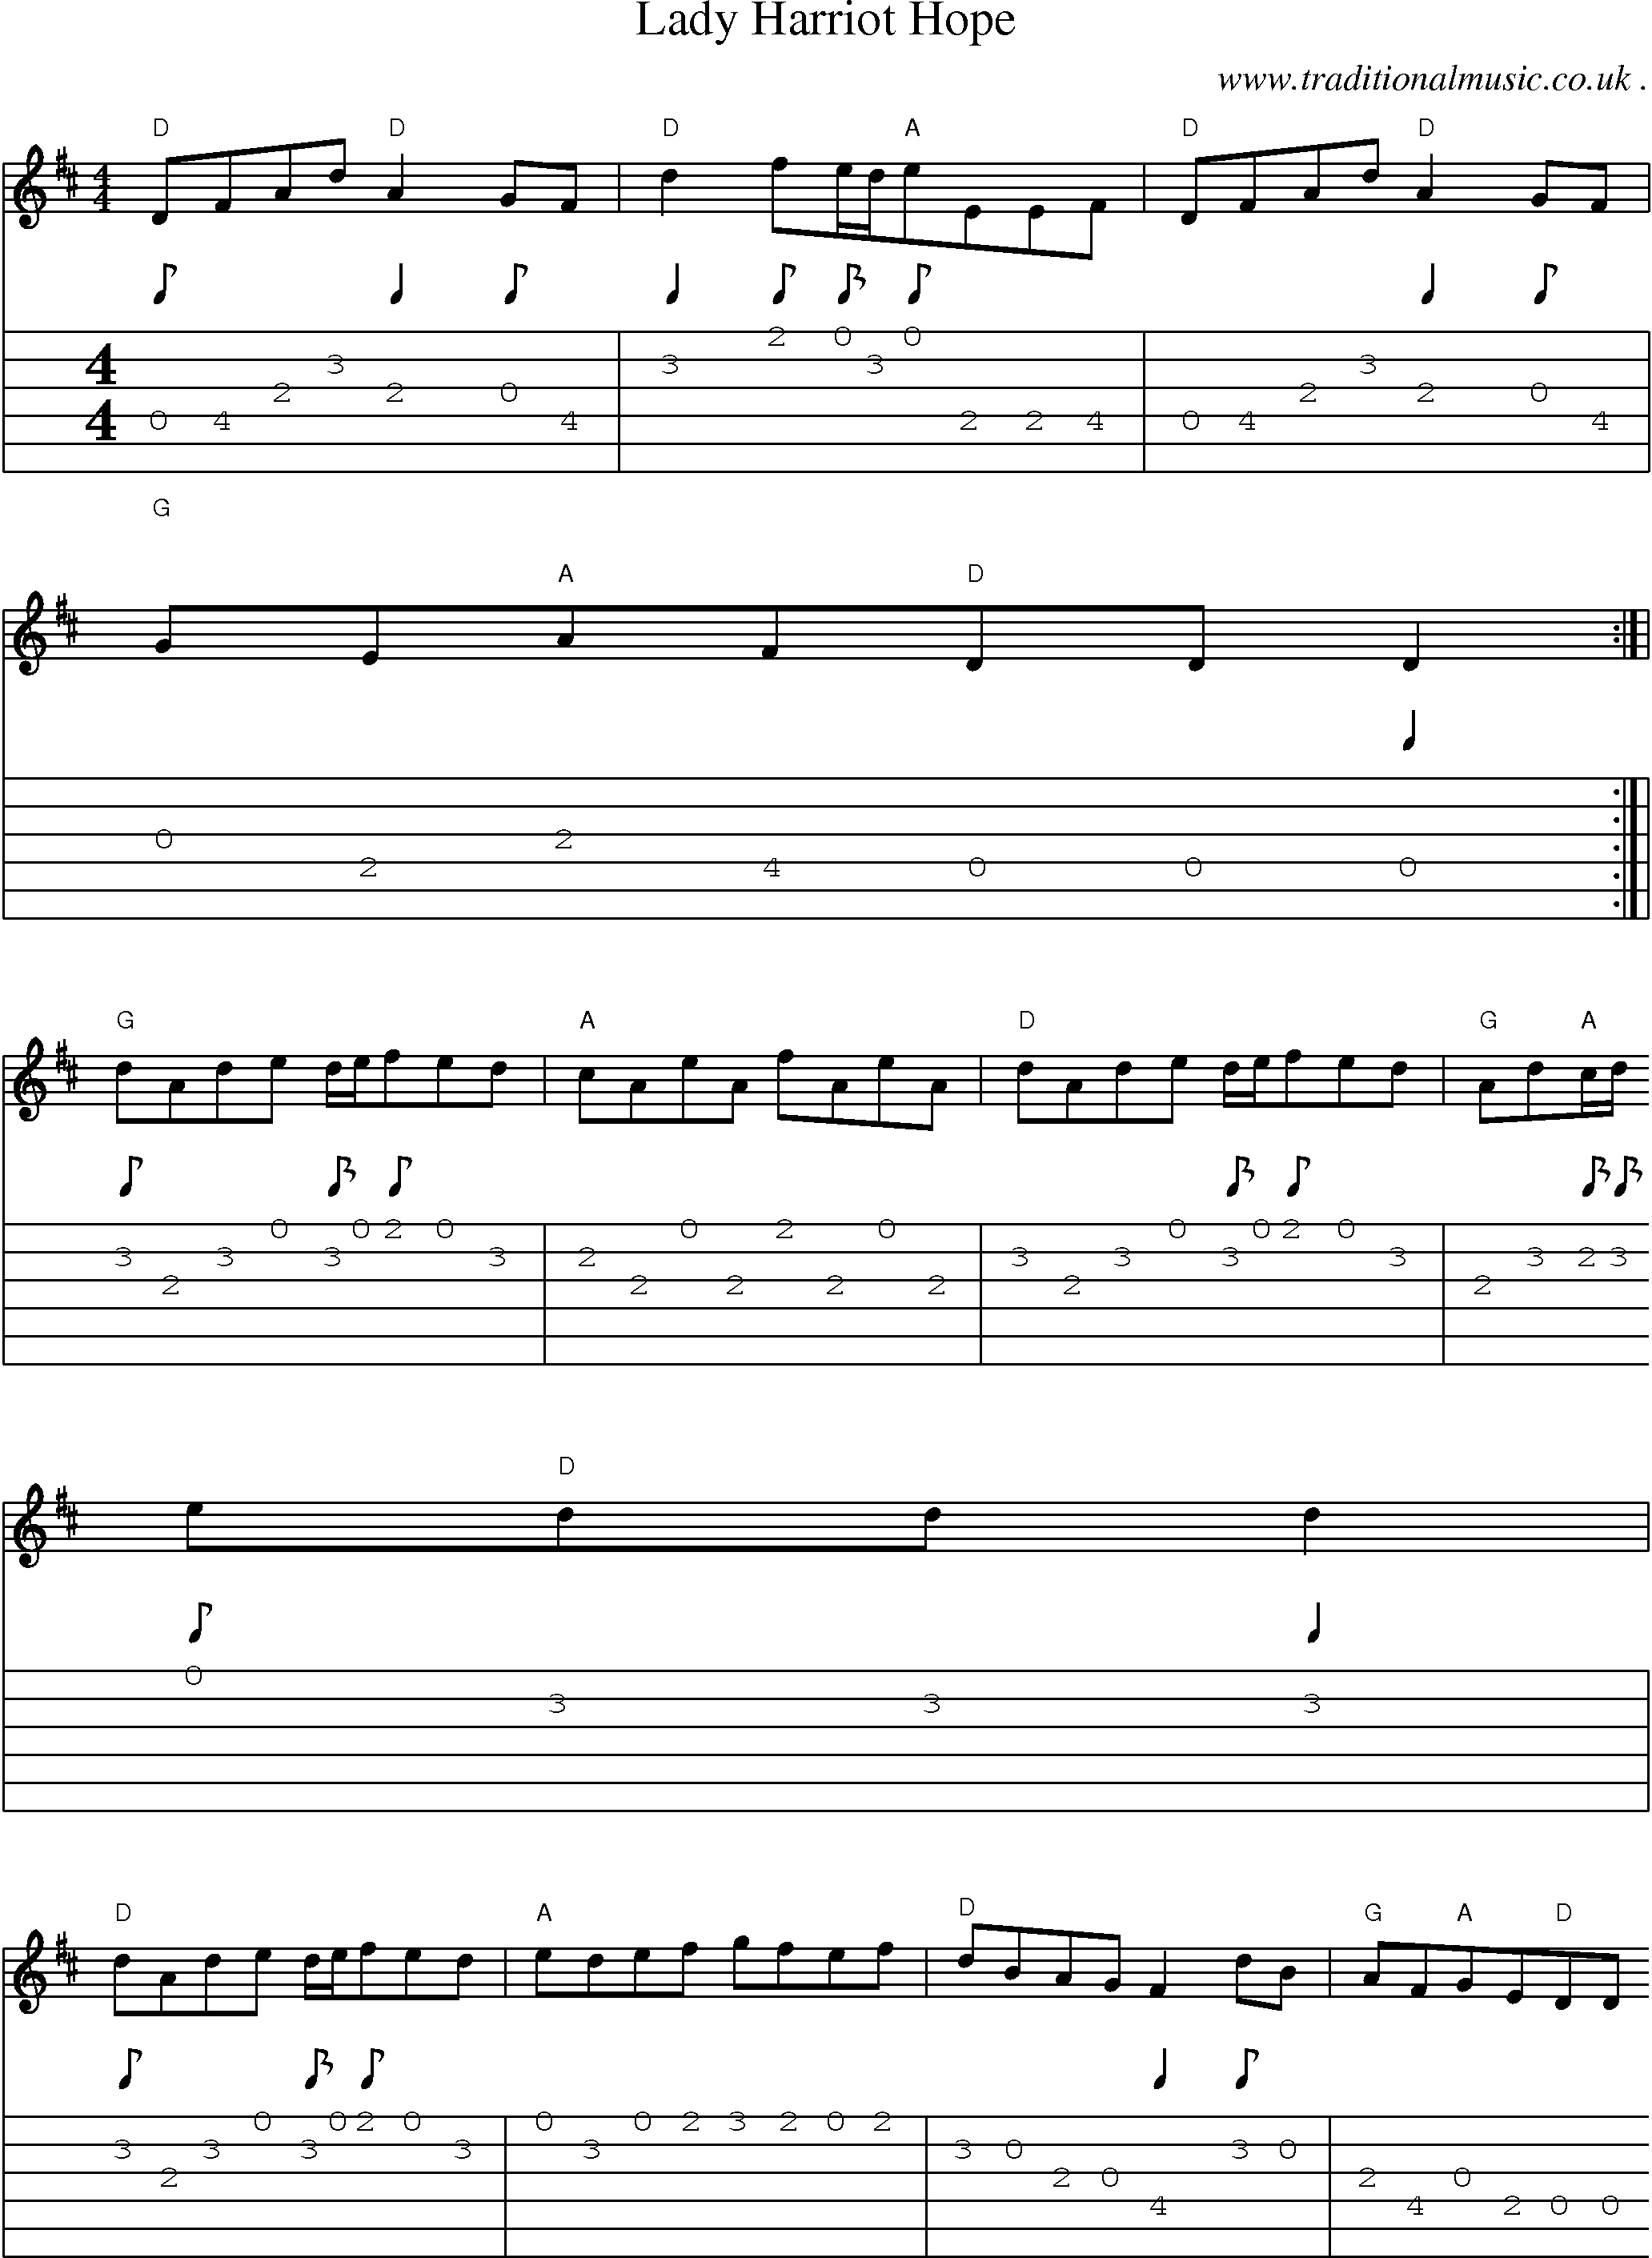 Sheet-Music and Guitar Tabs for Lady Harriot Hope